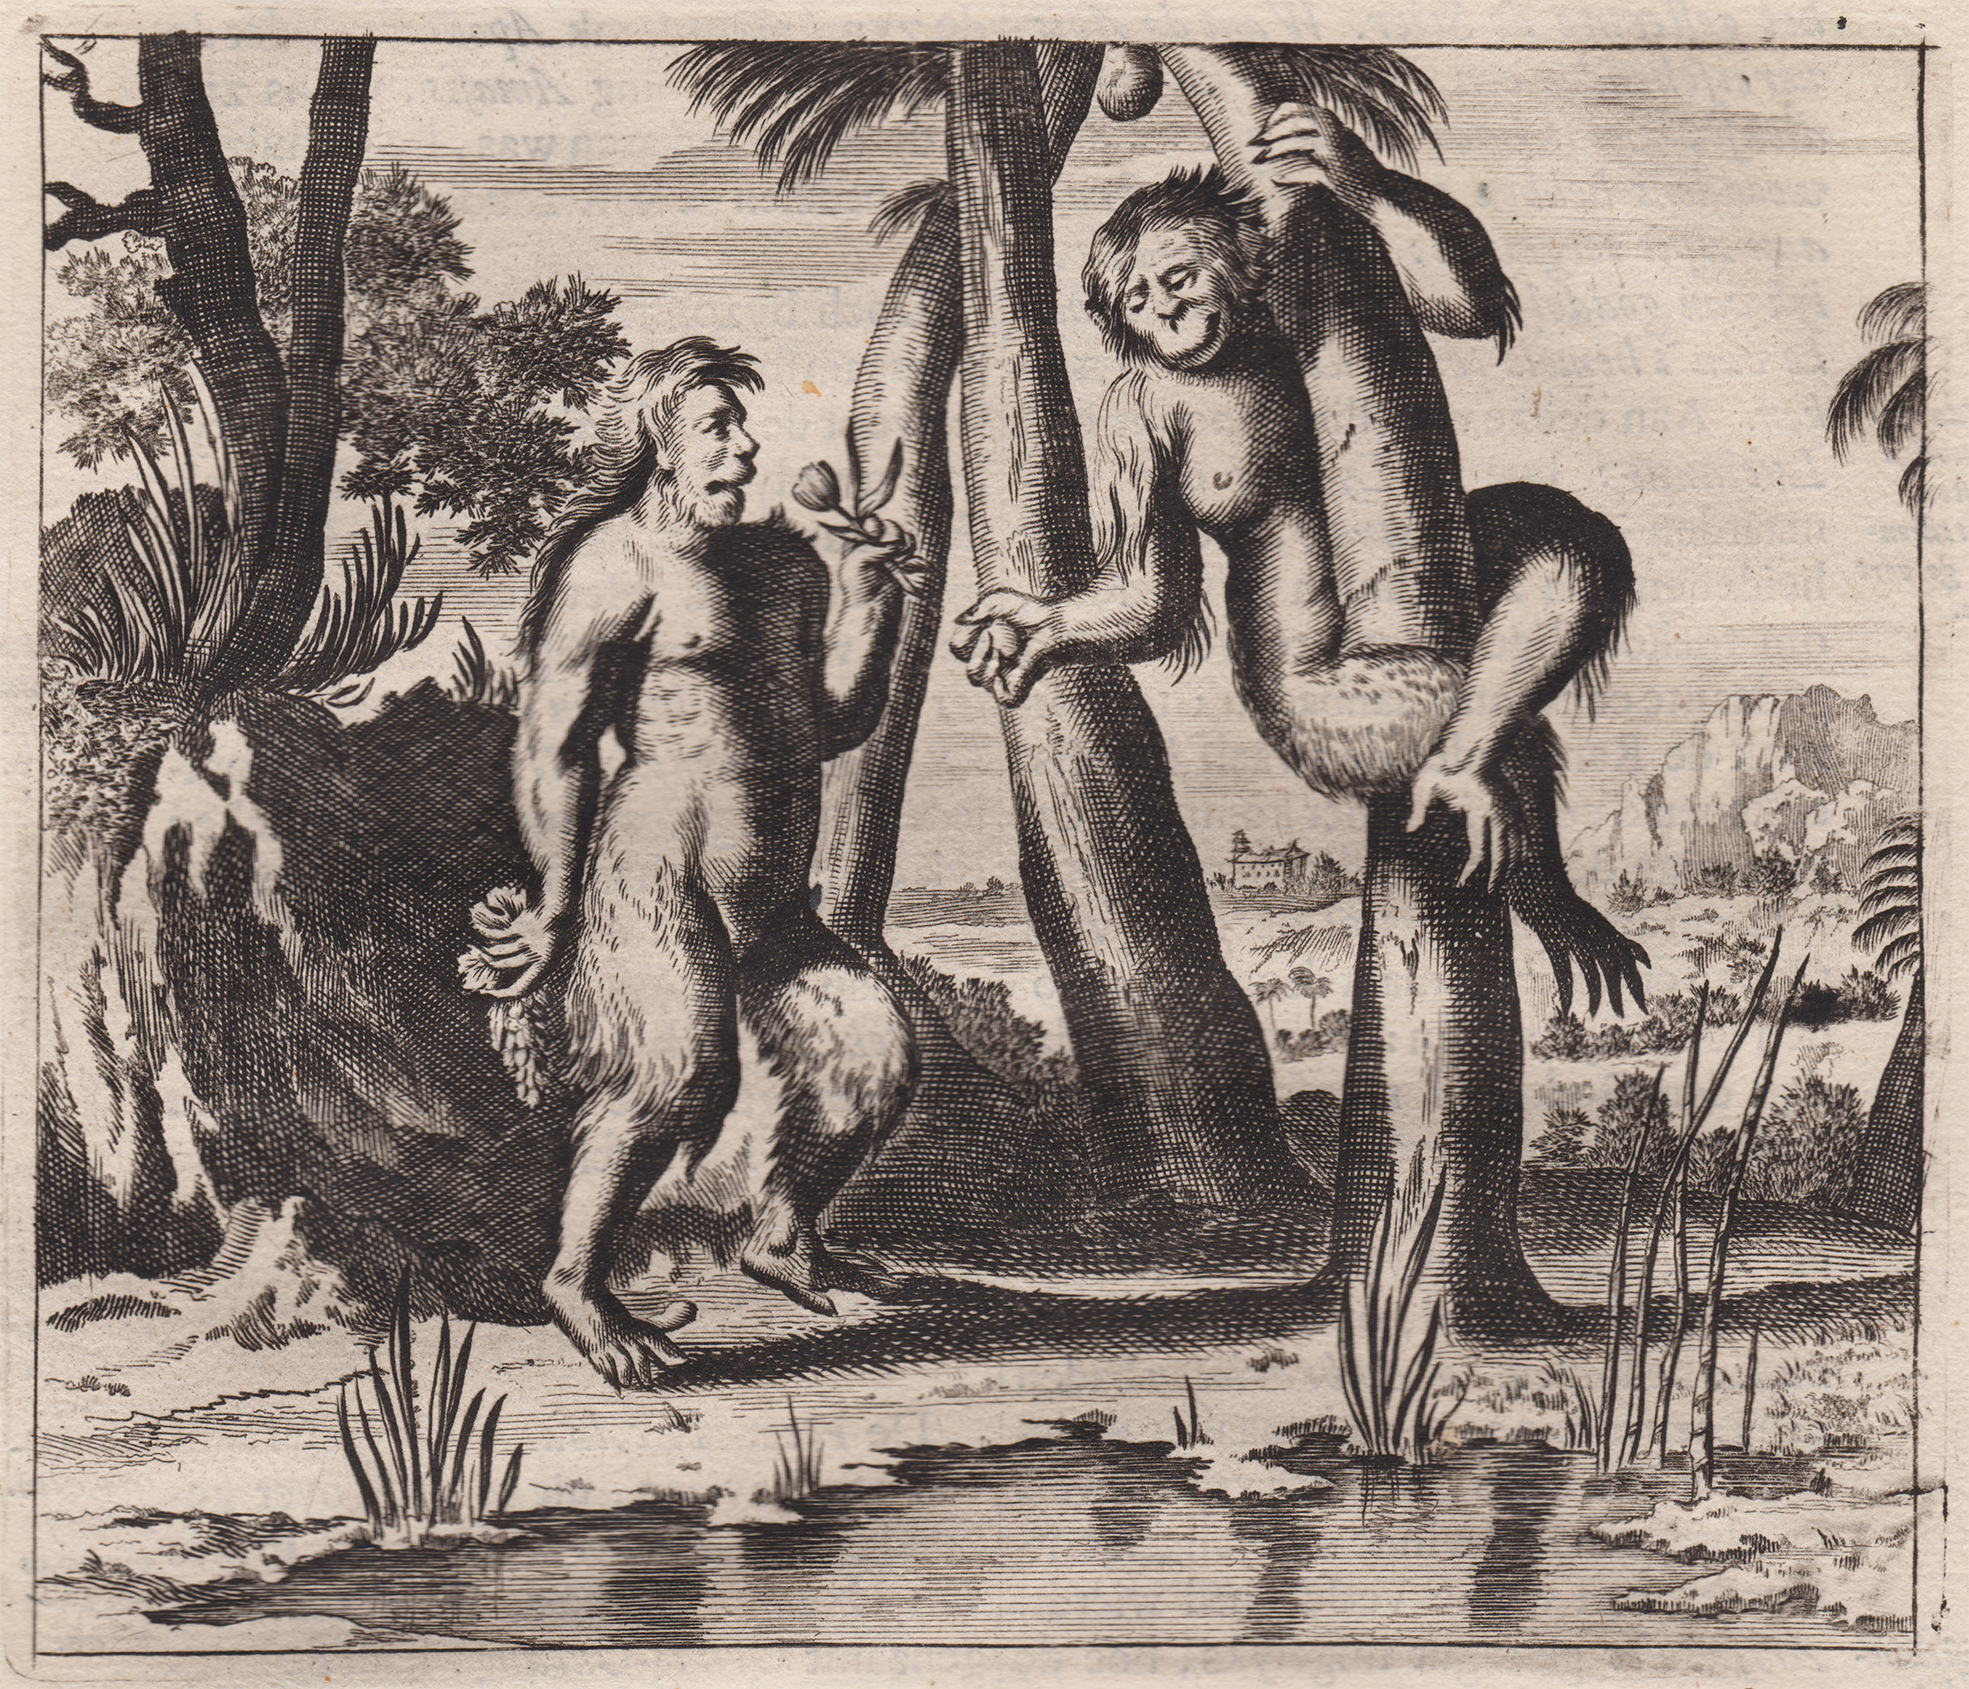 Anon. after Arnoldus Montanus Baviaan Orang-Outang 1669, etching, 13.6 x 16 cm. Private collection.